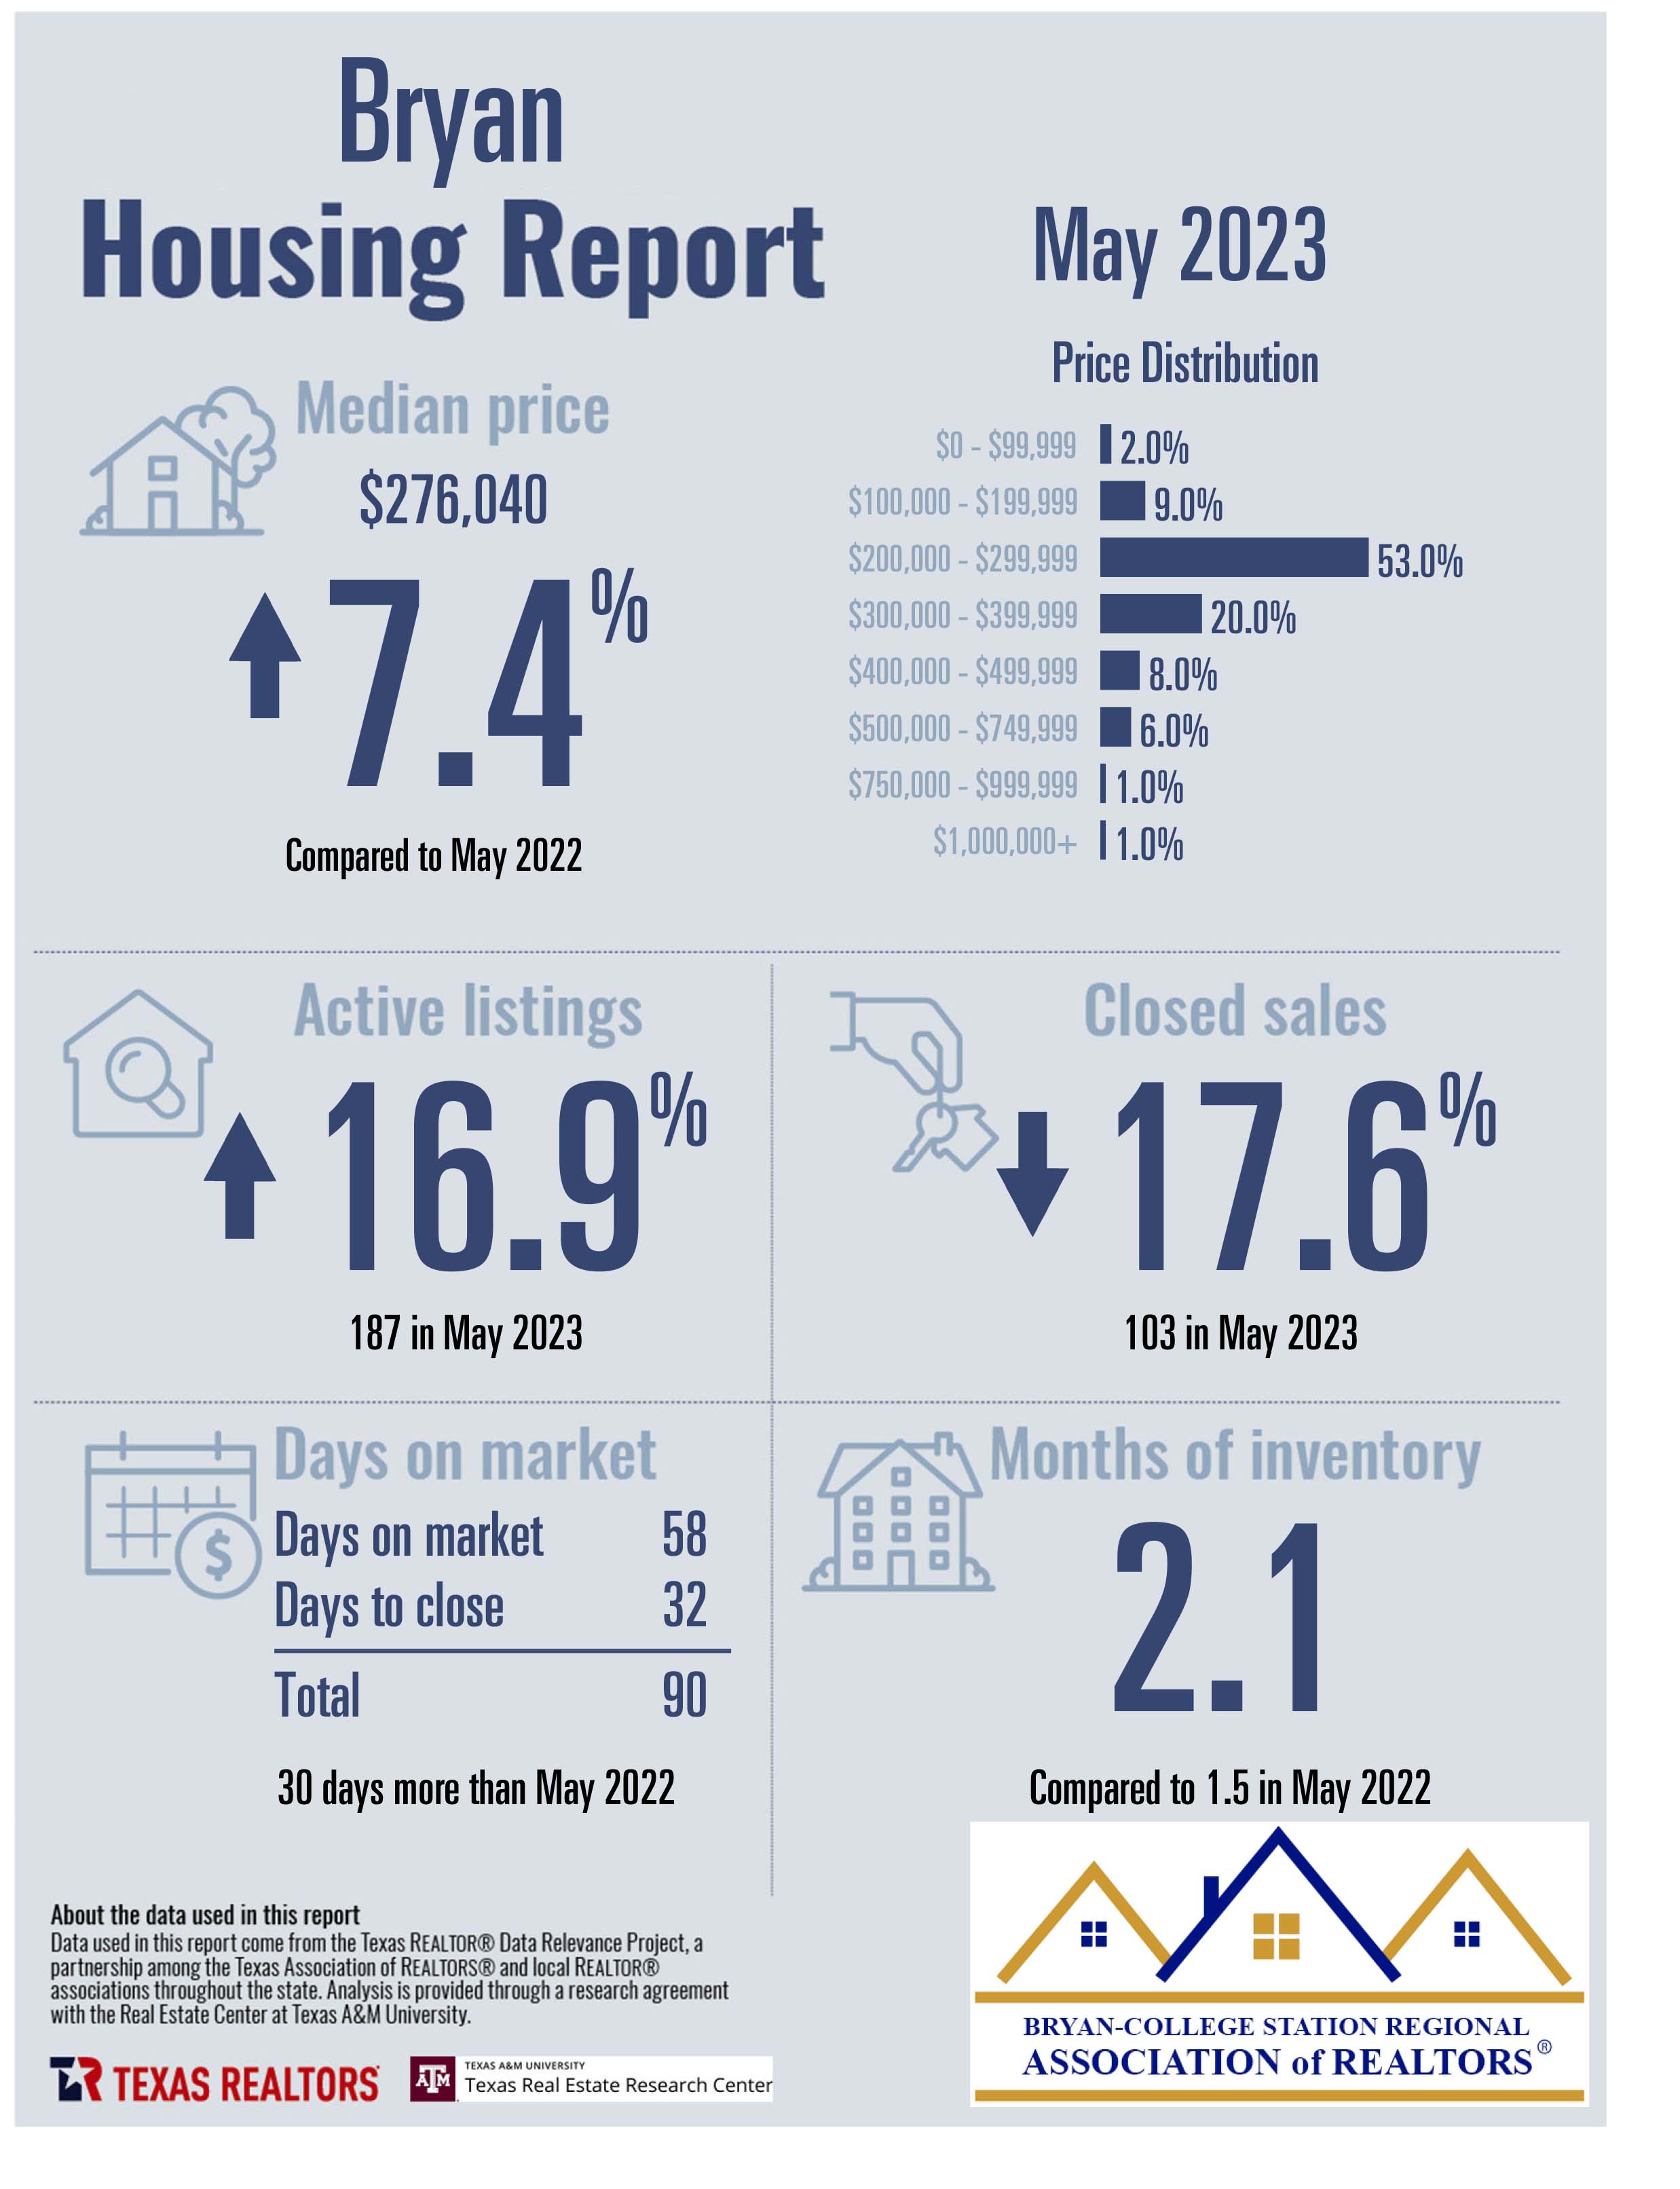 Residential Home Sale Report may 2023 - Bryan